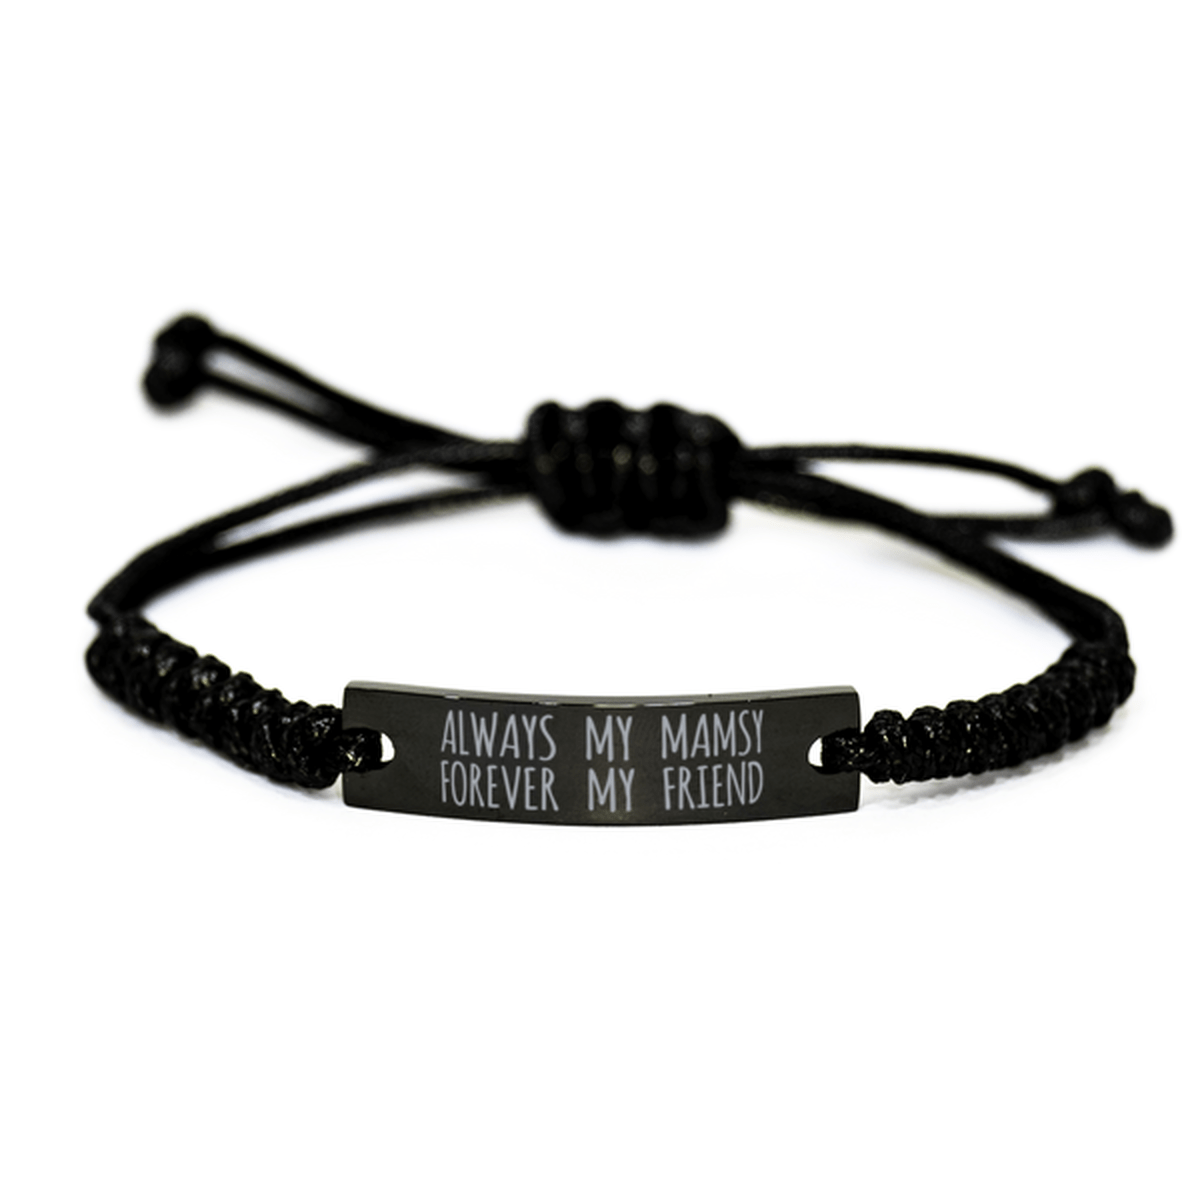 Inspirational Mamsy Black Rope Bracelet, Always My Mamsy Forever My Friend, Best Birthday Gifts For Family